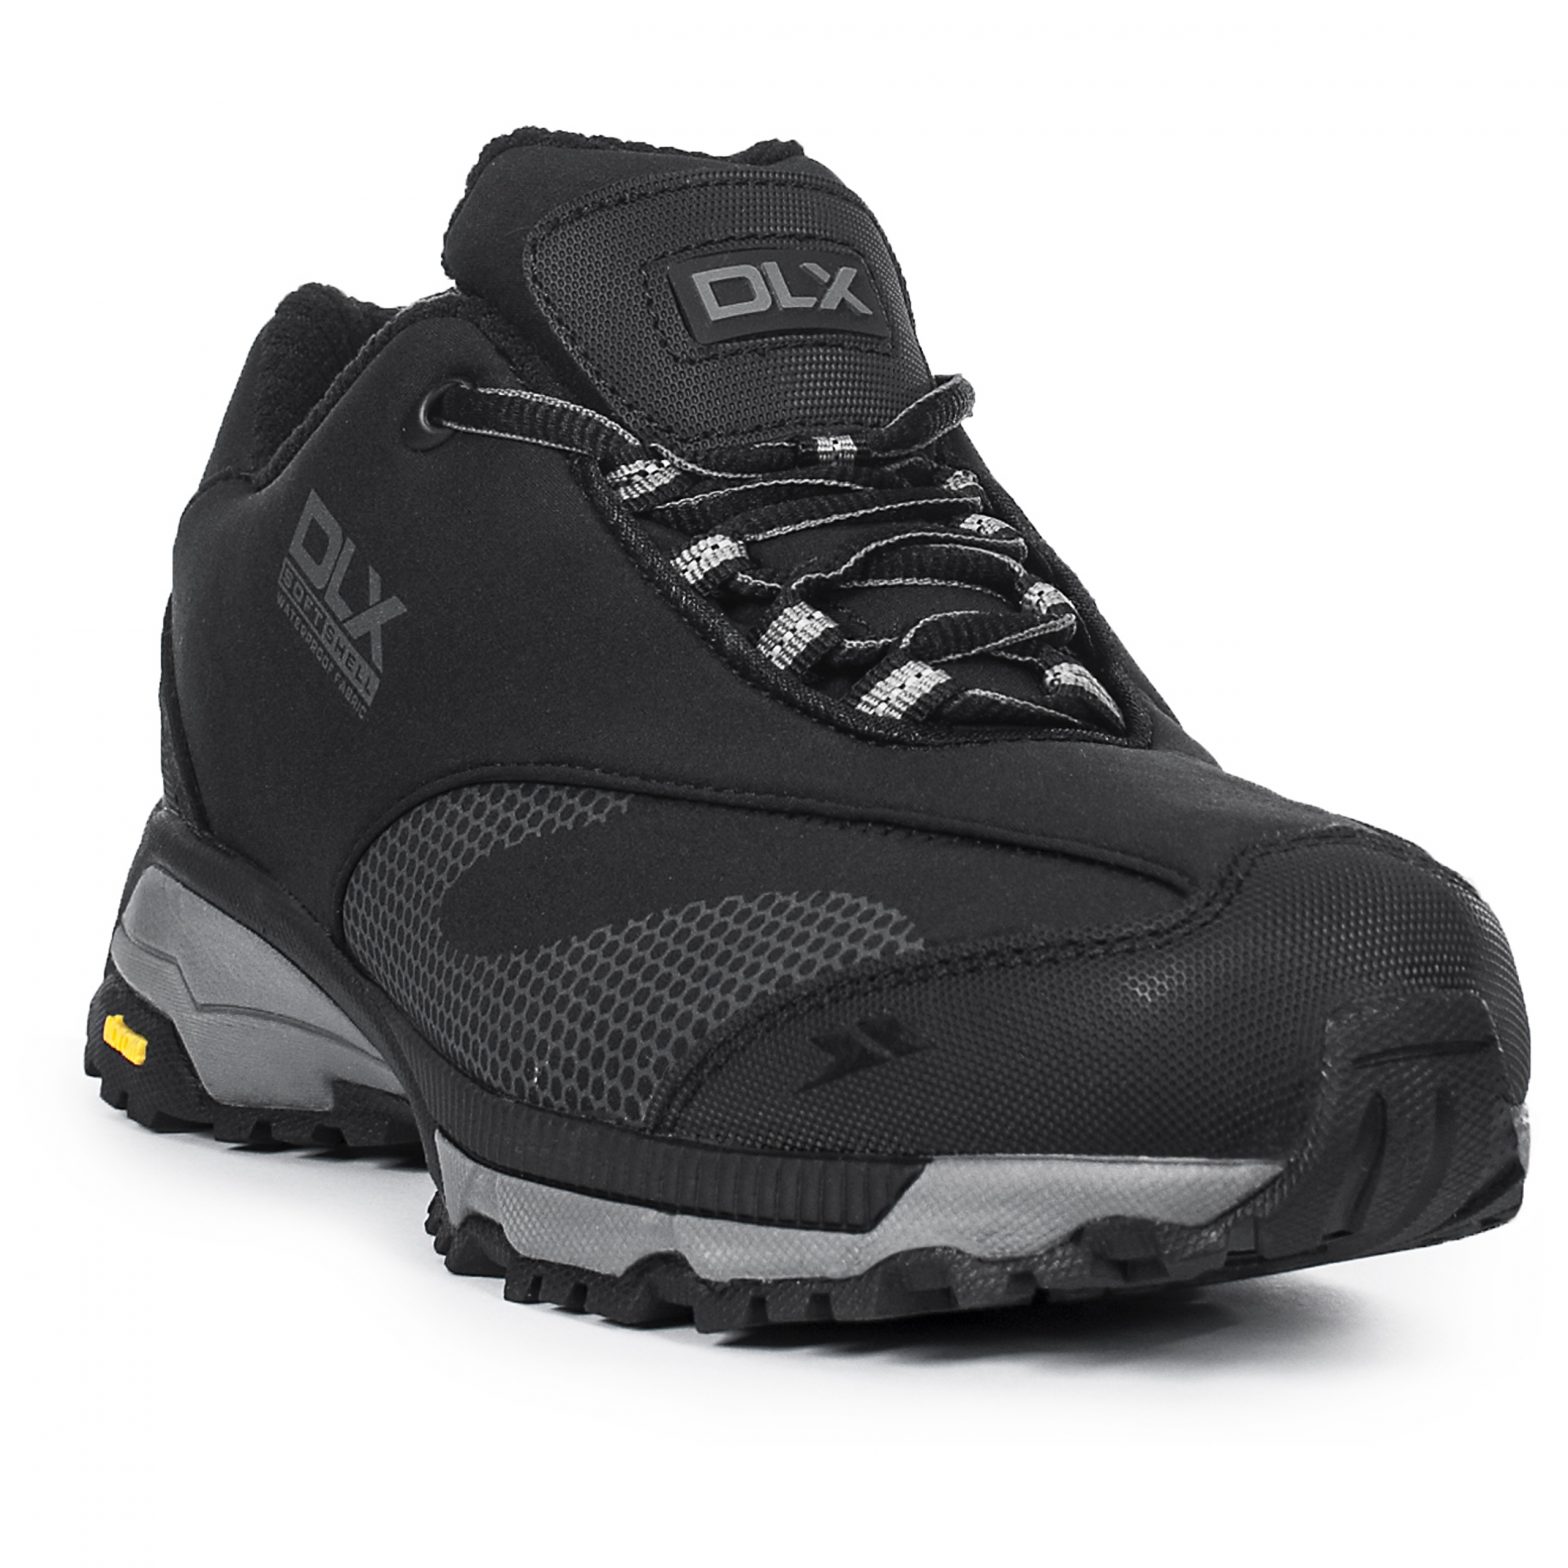 Off road with Trespass trail shoes- a 